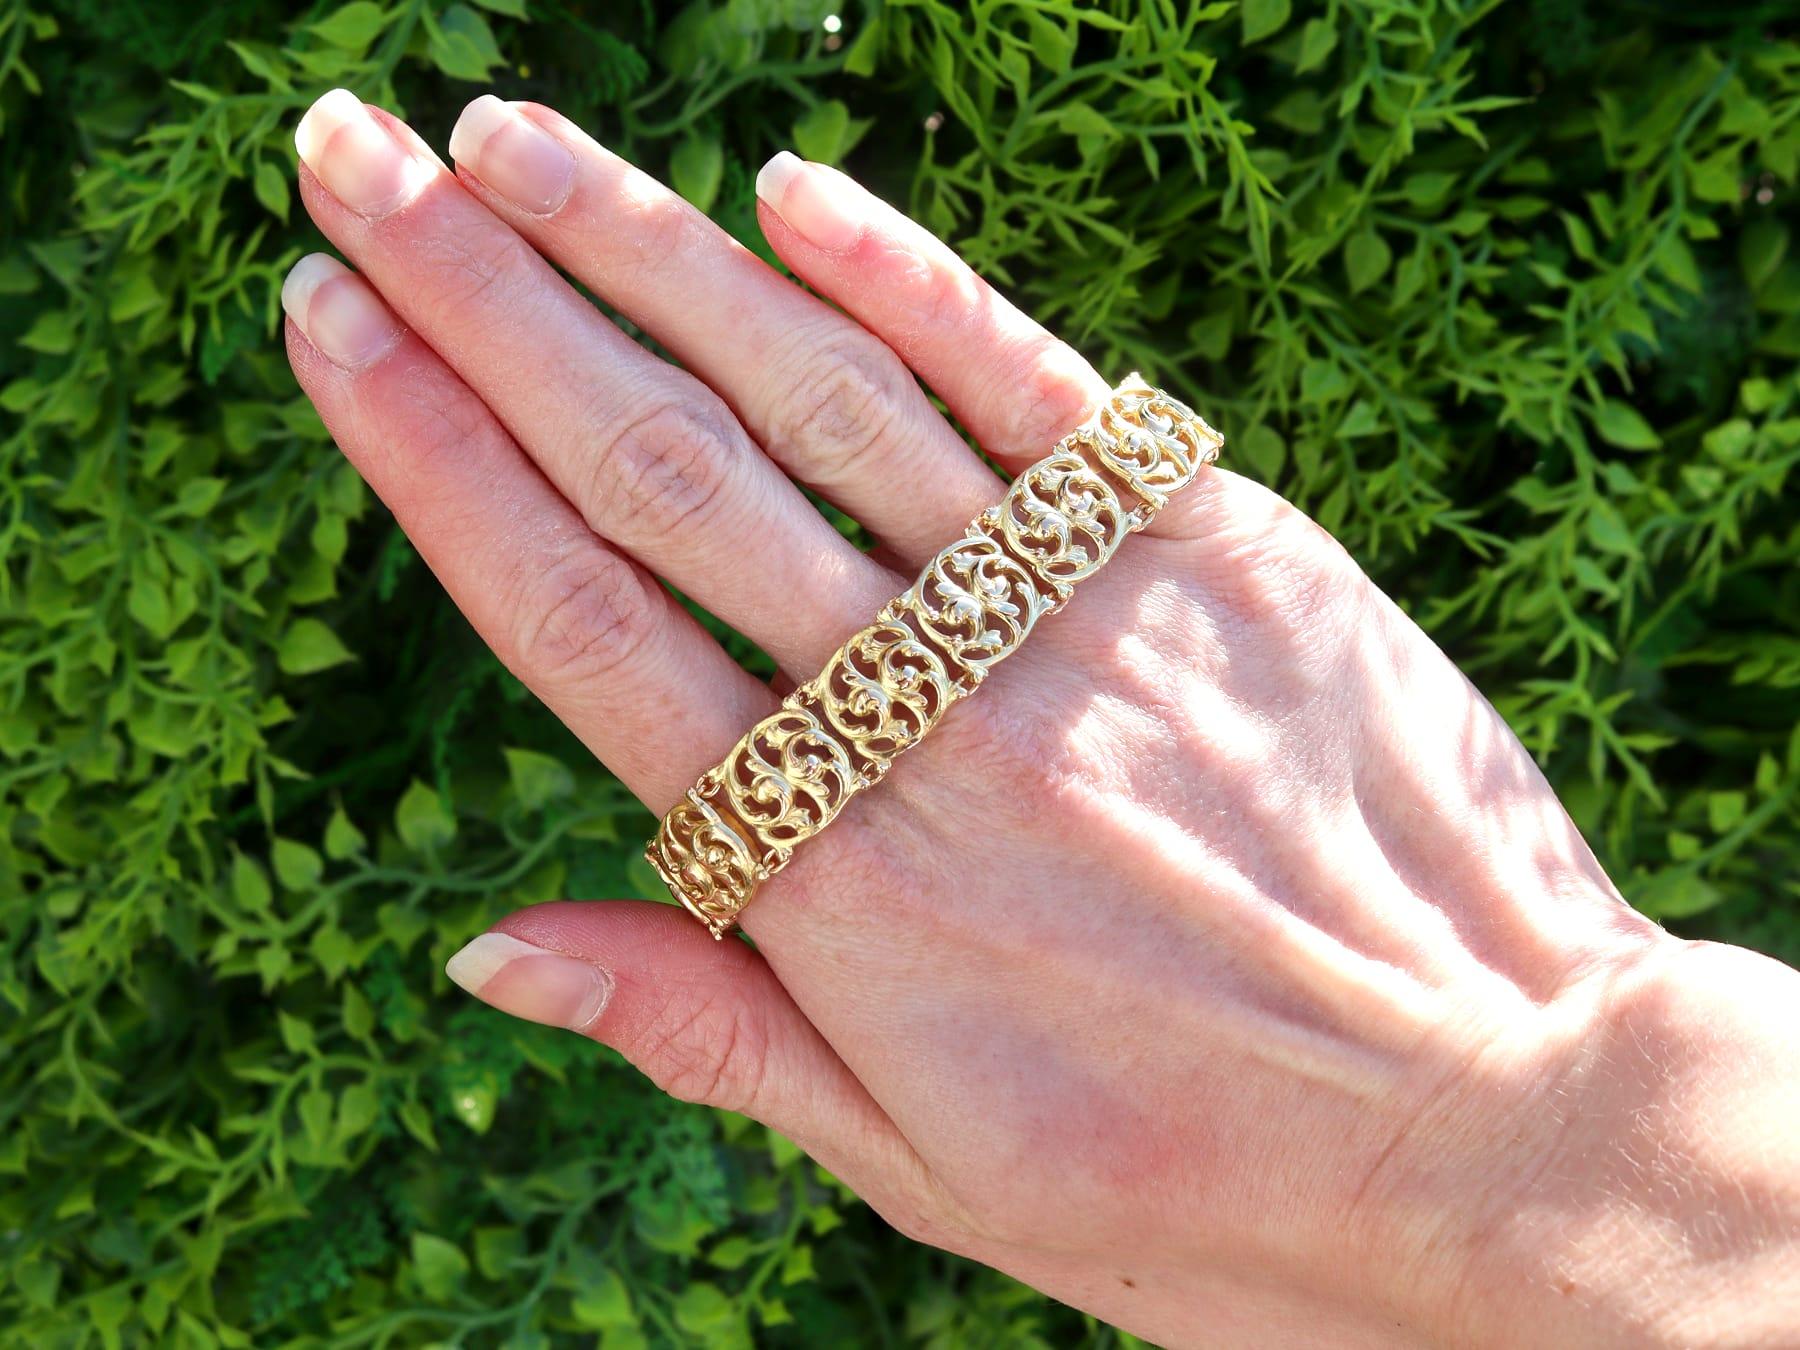 An exceptional, fine and impressive antique French 18 karat yellow gold Art Nouveau style bracelet; part of our diverse antique jewellery and estate jewelry collections.

This exceptional, fine and impressive antique Art Nouveau bracelet has been